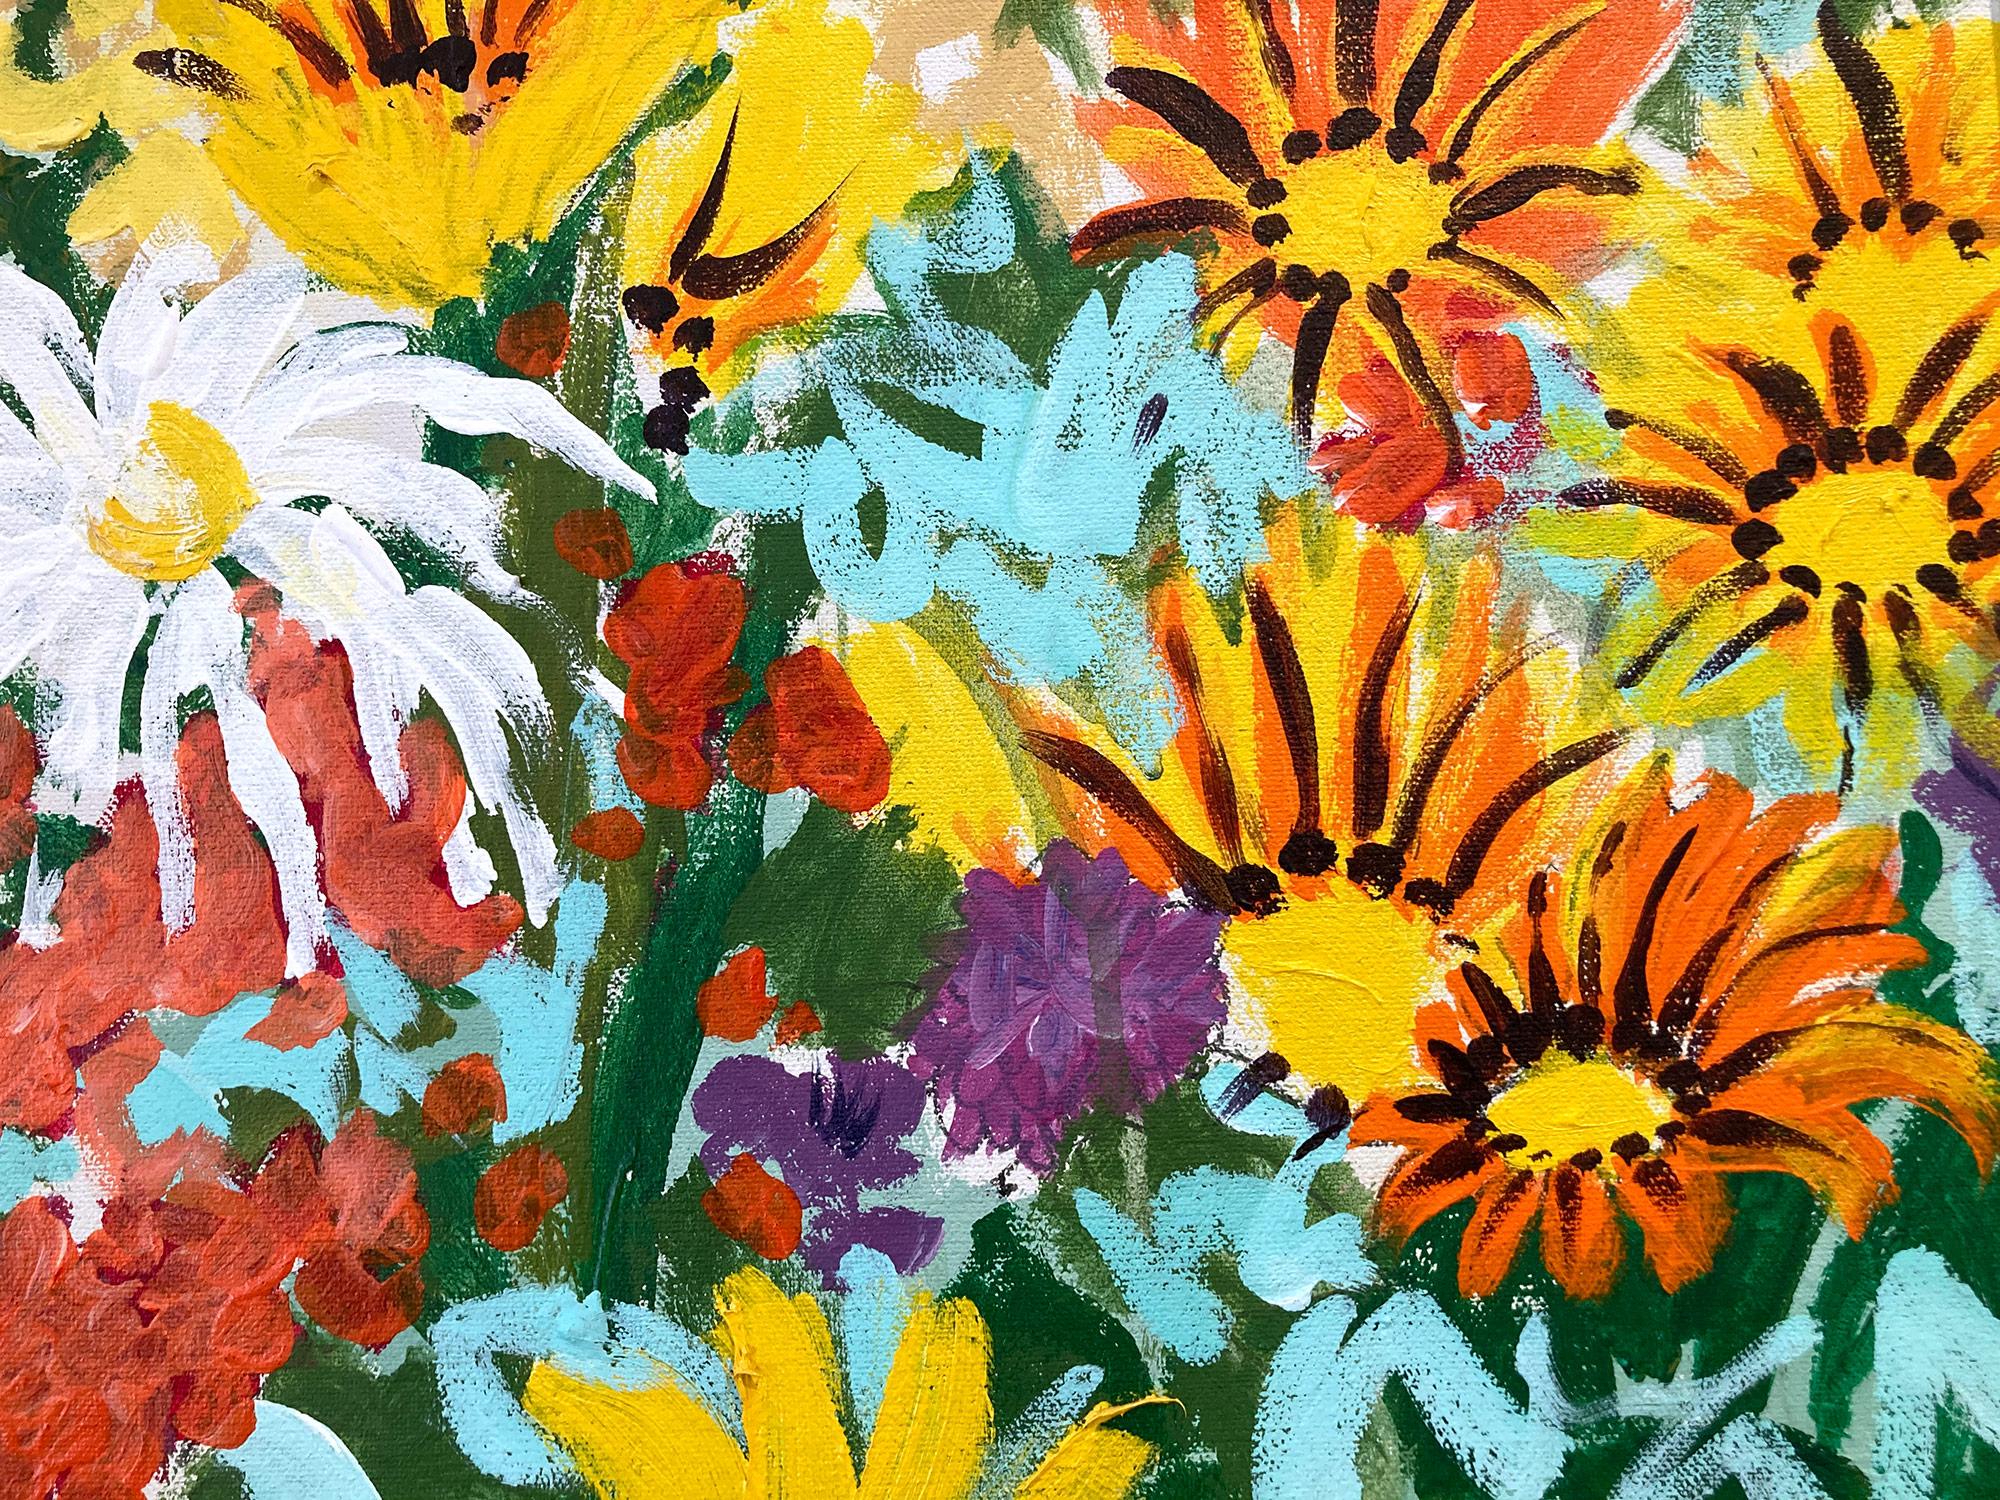 A vibrant oil painting by American artist Gordon Micunis. Known for Richly colored botanical and landscape paintings, theatre scenery and costume design, this piece exudes color and light in this bright floral. Flowers arranged in abundance over a